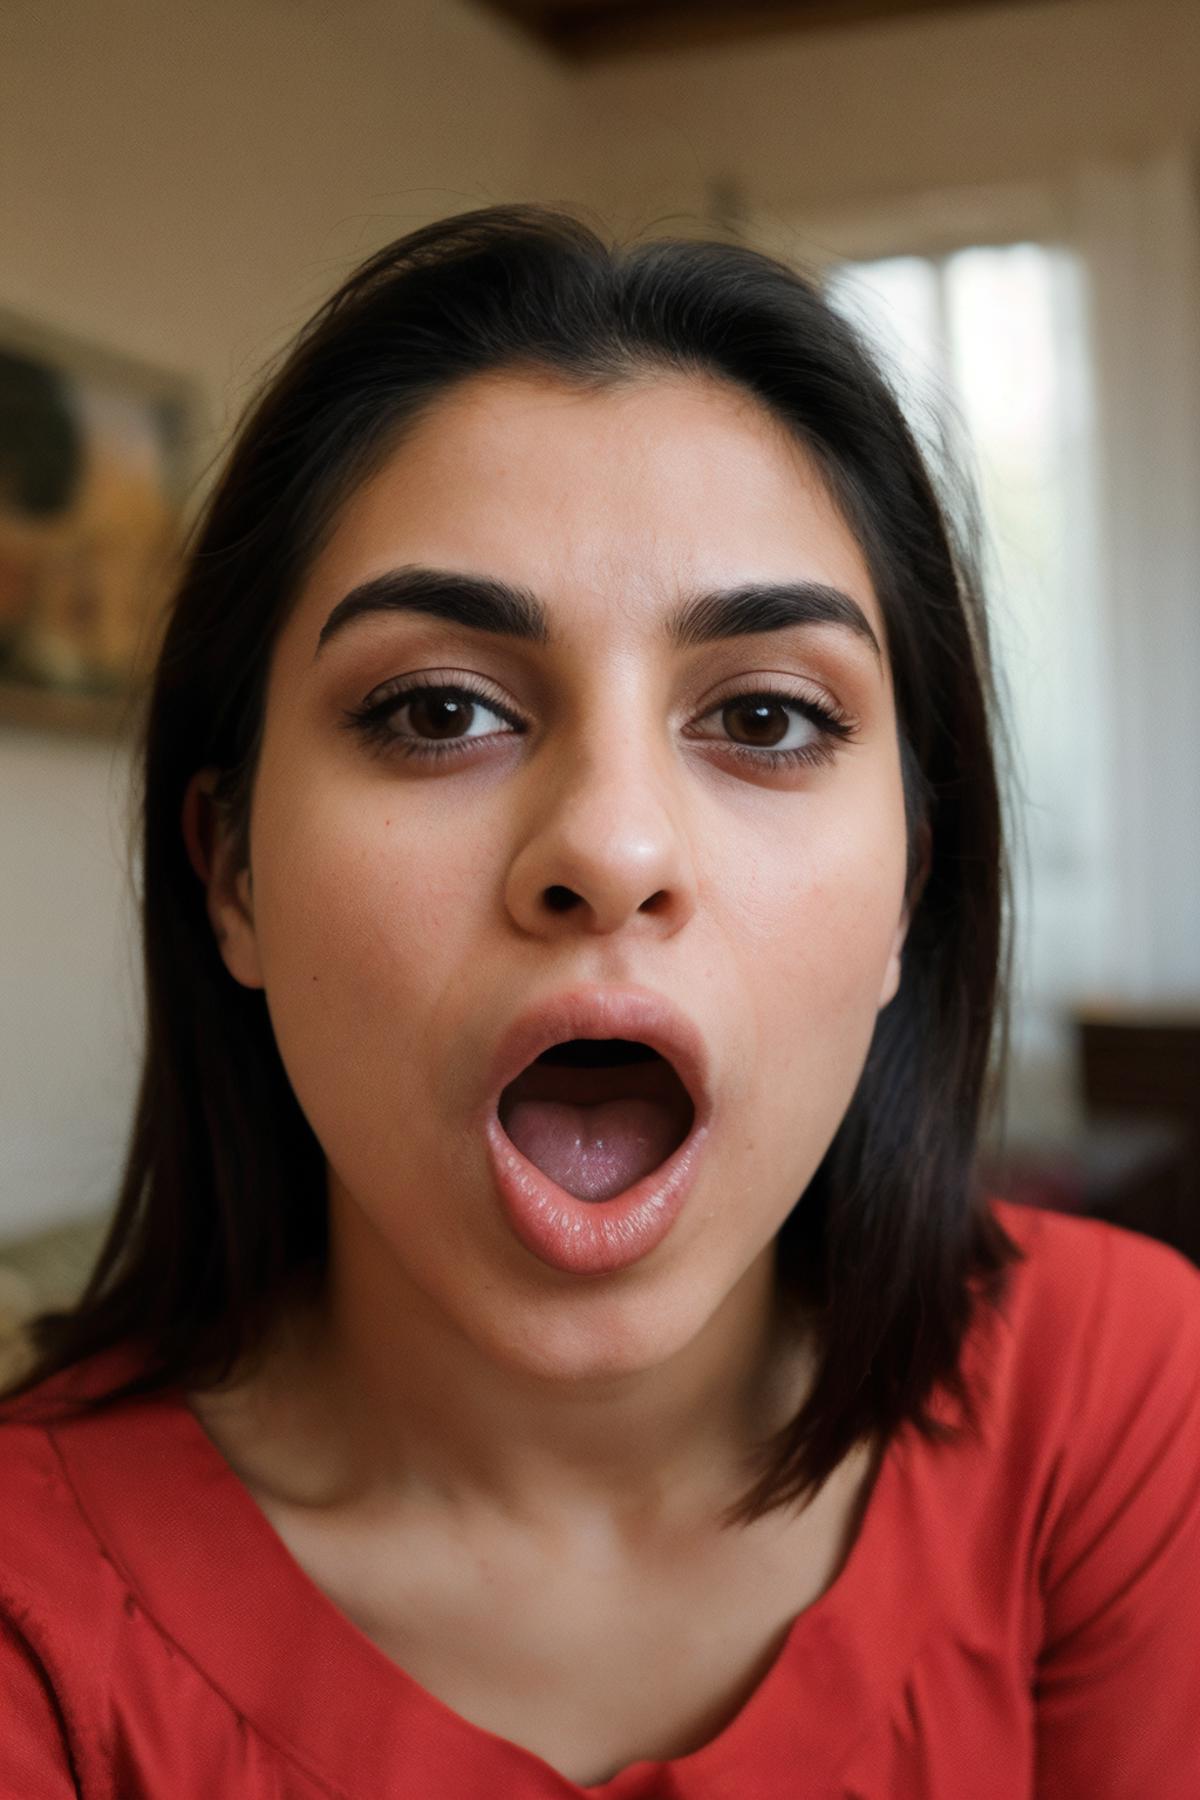 Gape Mouth - Wide Open Mouth Helper image by RealismLover